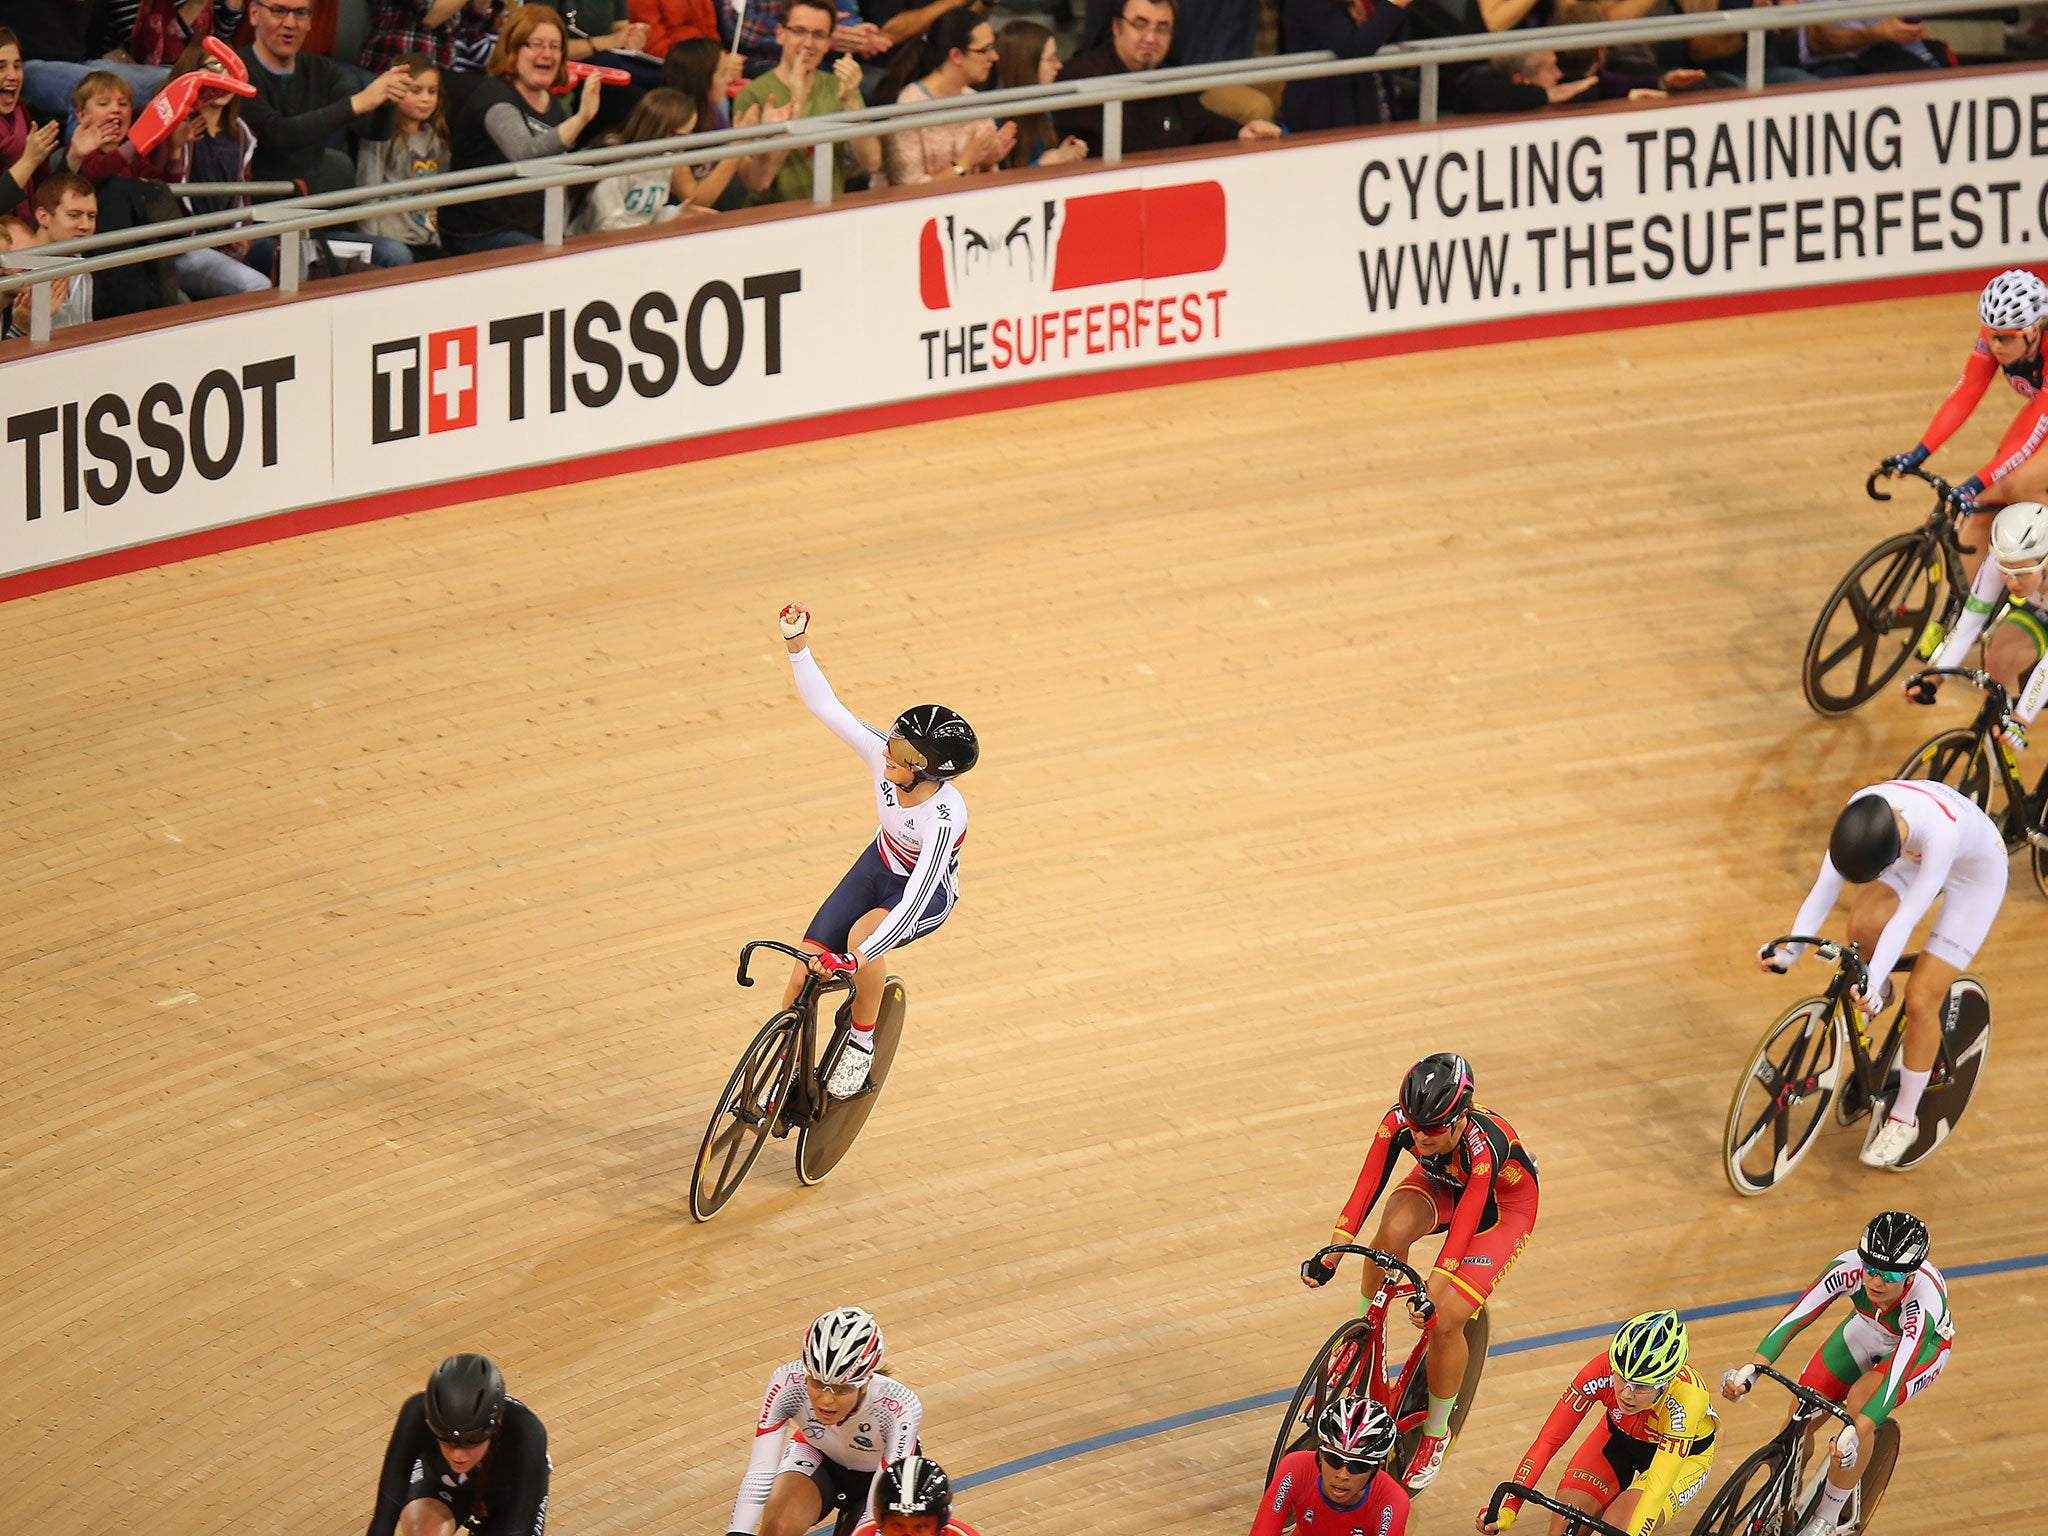 Laura Trott waves to the crowd after winning the Women's Omnium Scratch Race